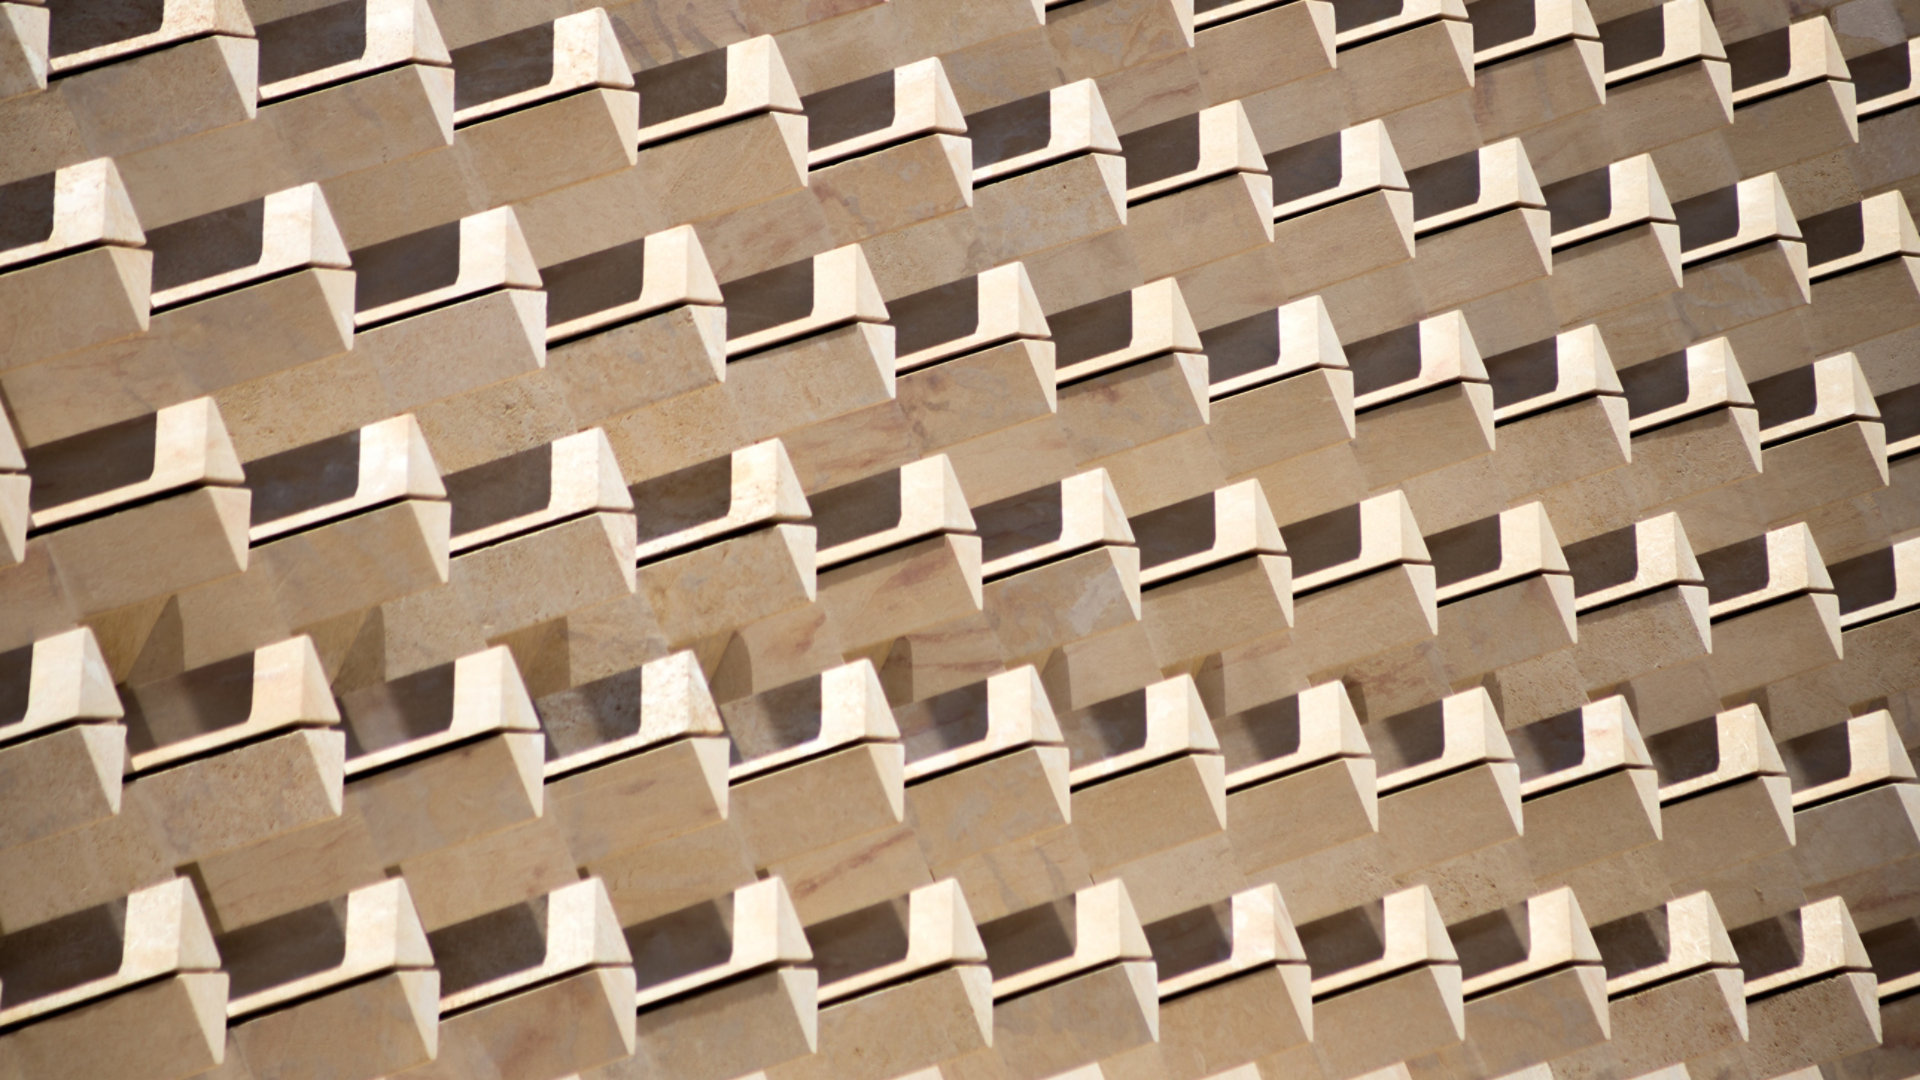 An abstract image of a building exterior